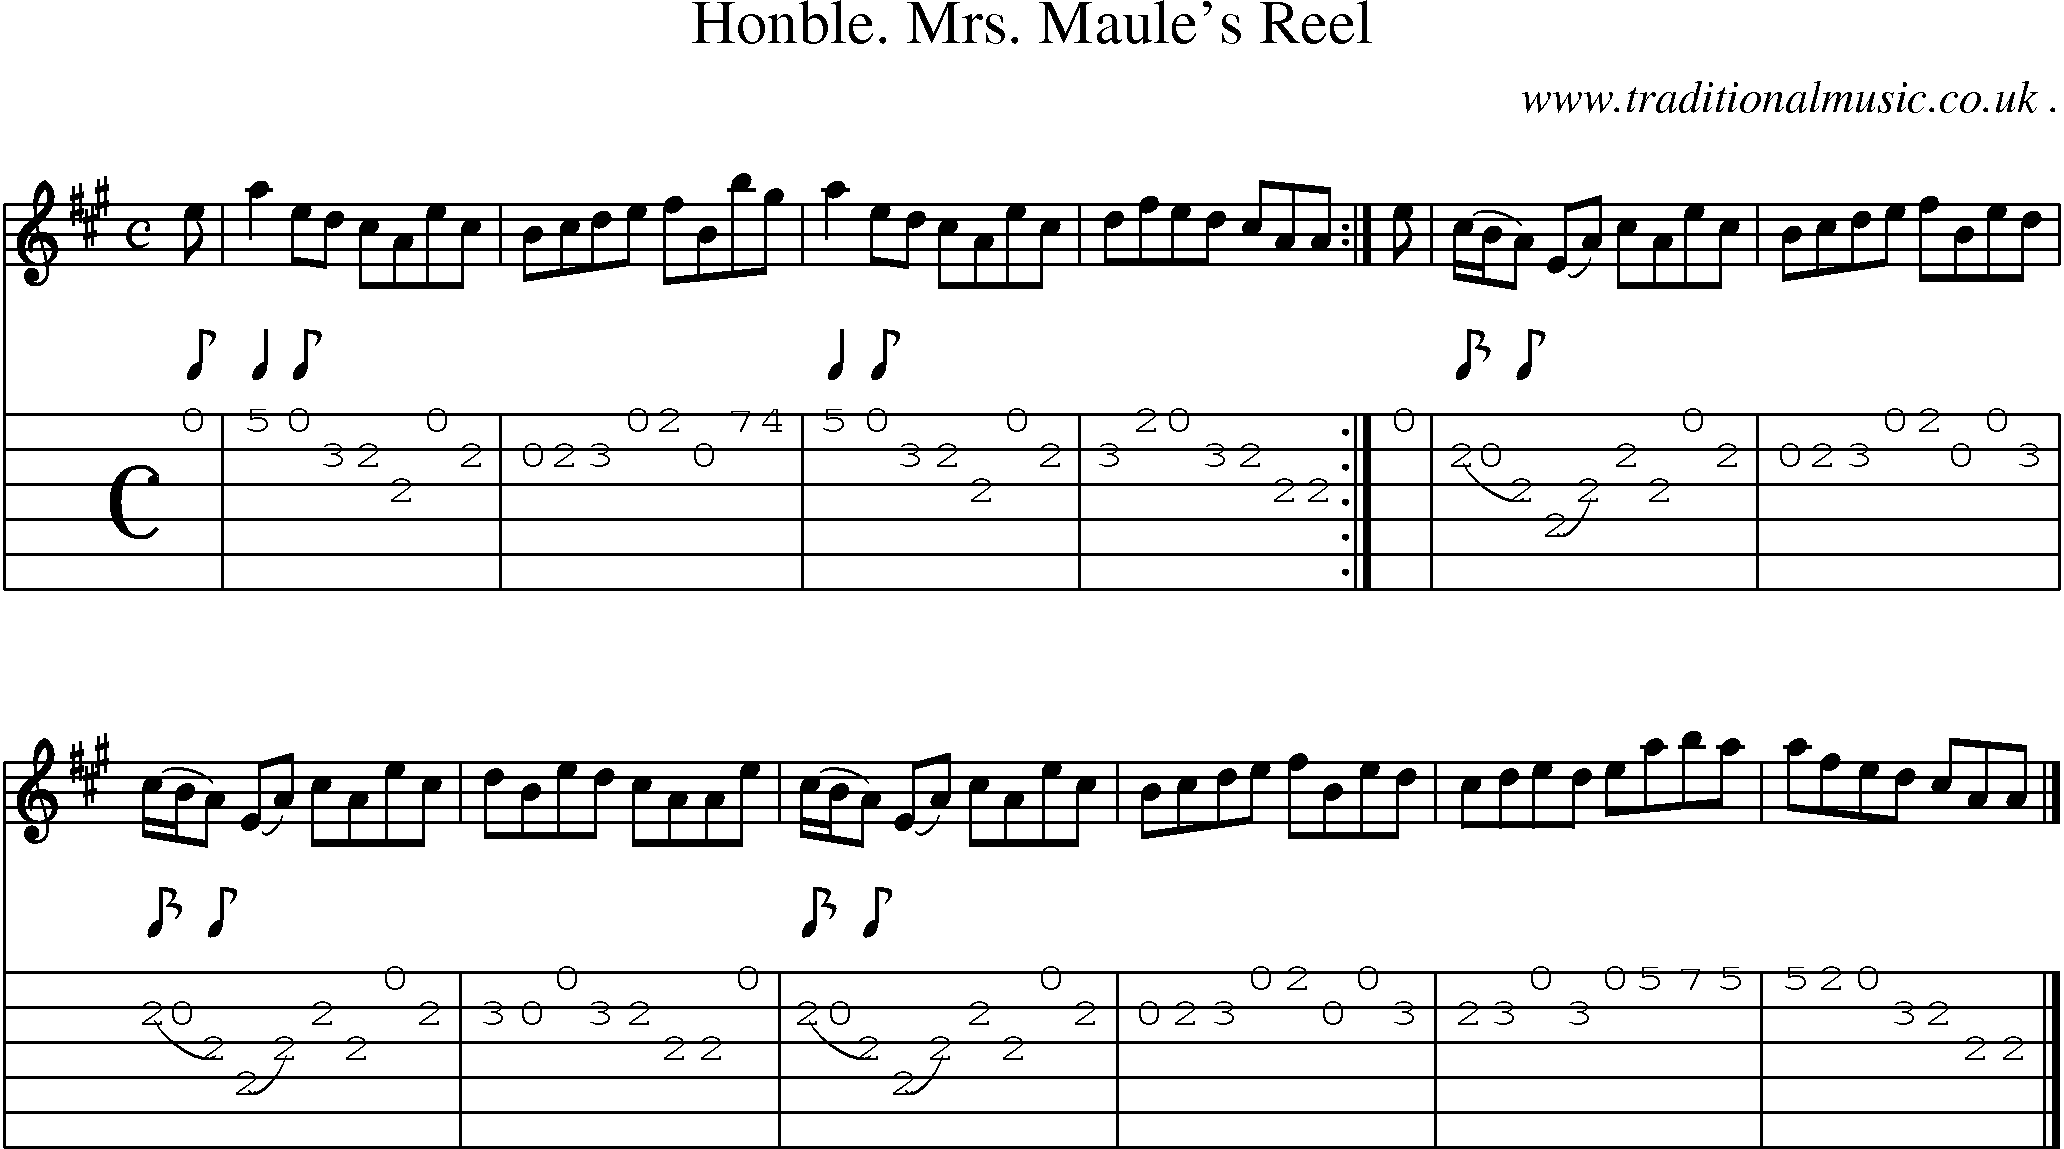 Sheet-music  score, Chords and Guitar Tabs for Honble Mrs Maules Reel